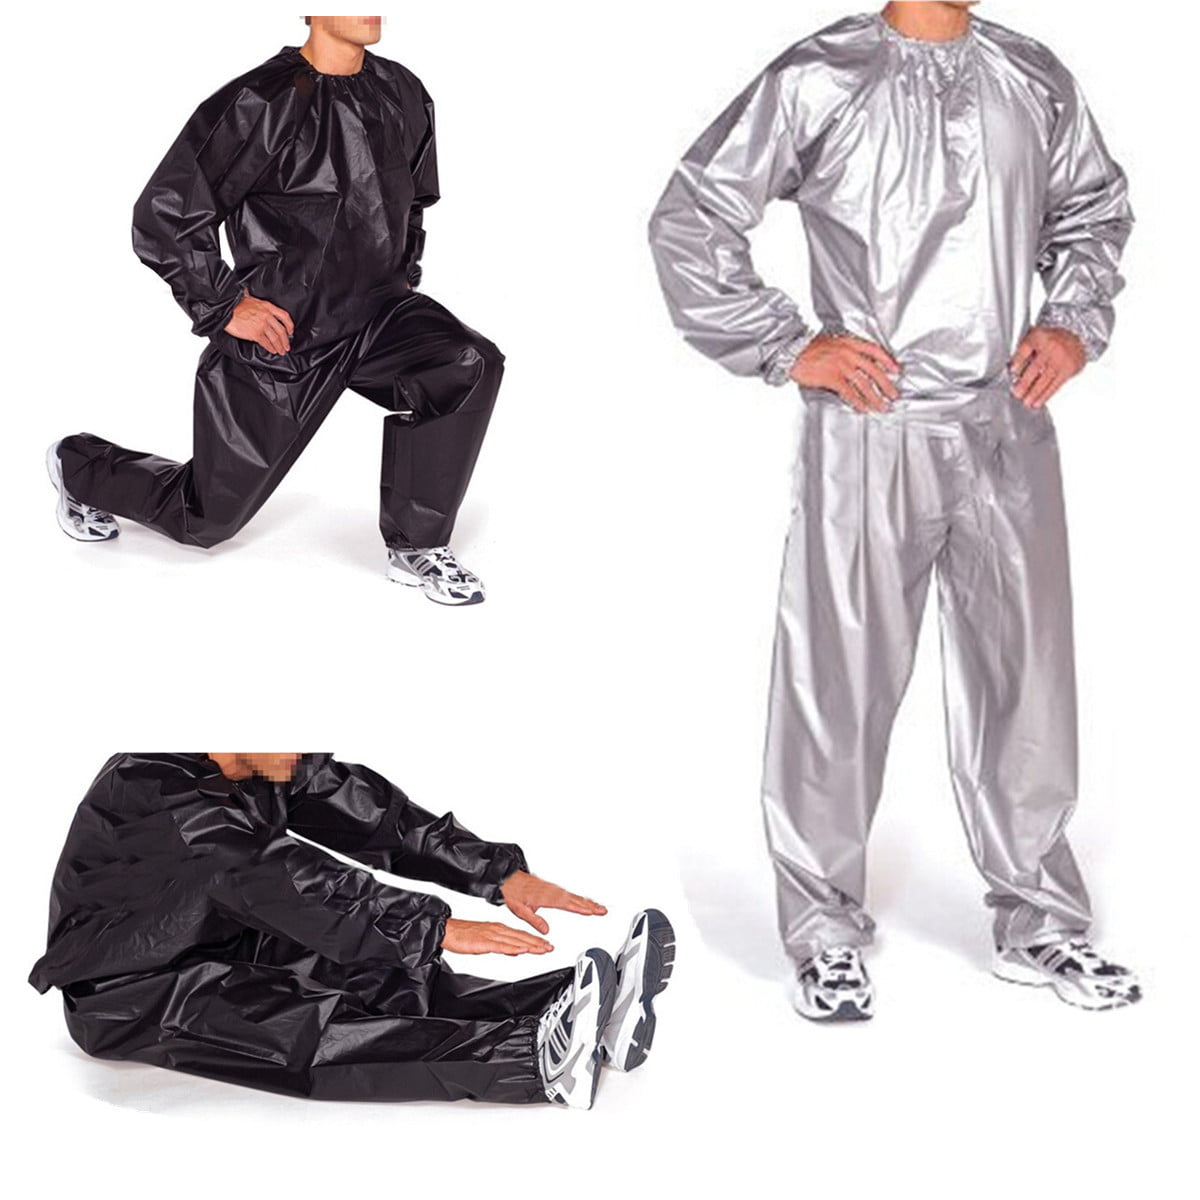 ZOR Heavy Duty Sweat Suit Sauna Exercise Gym Suit Fitness Weight Loss Anti Rip 